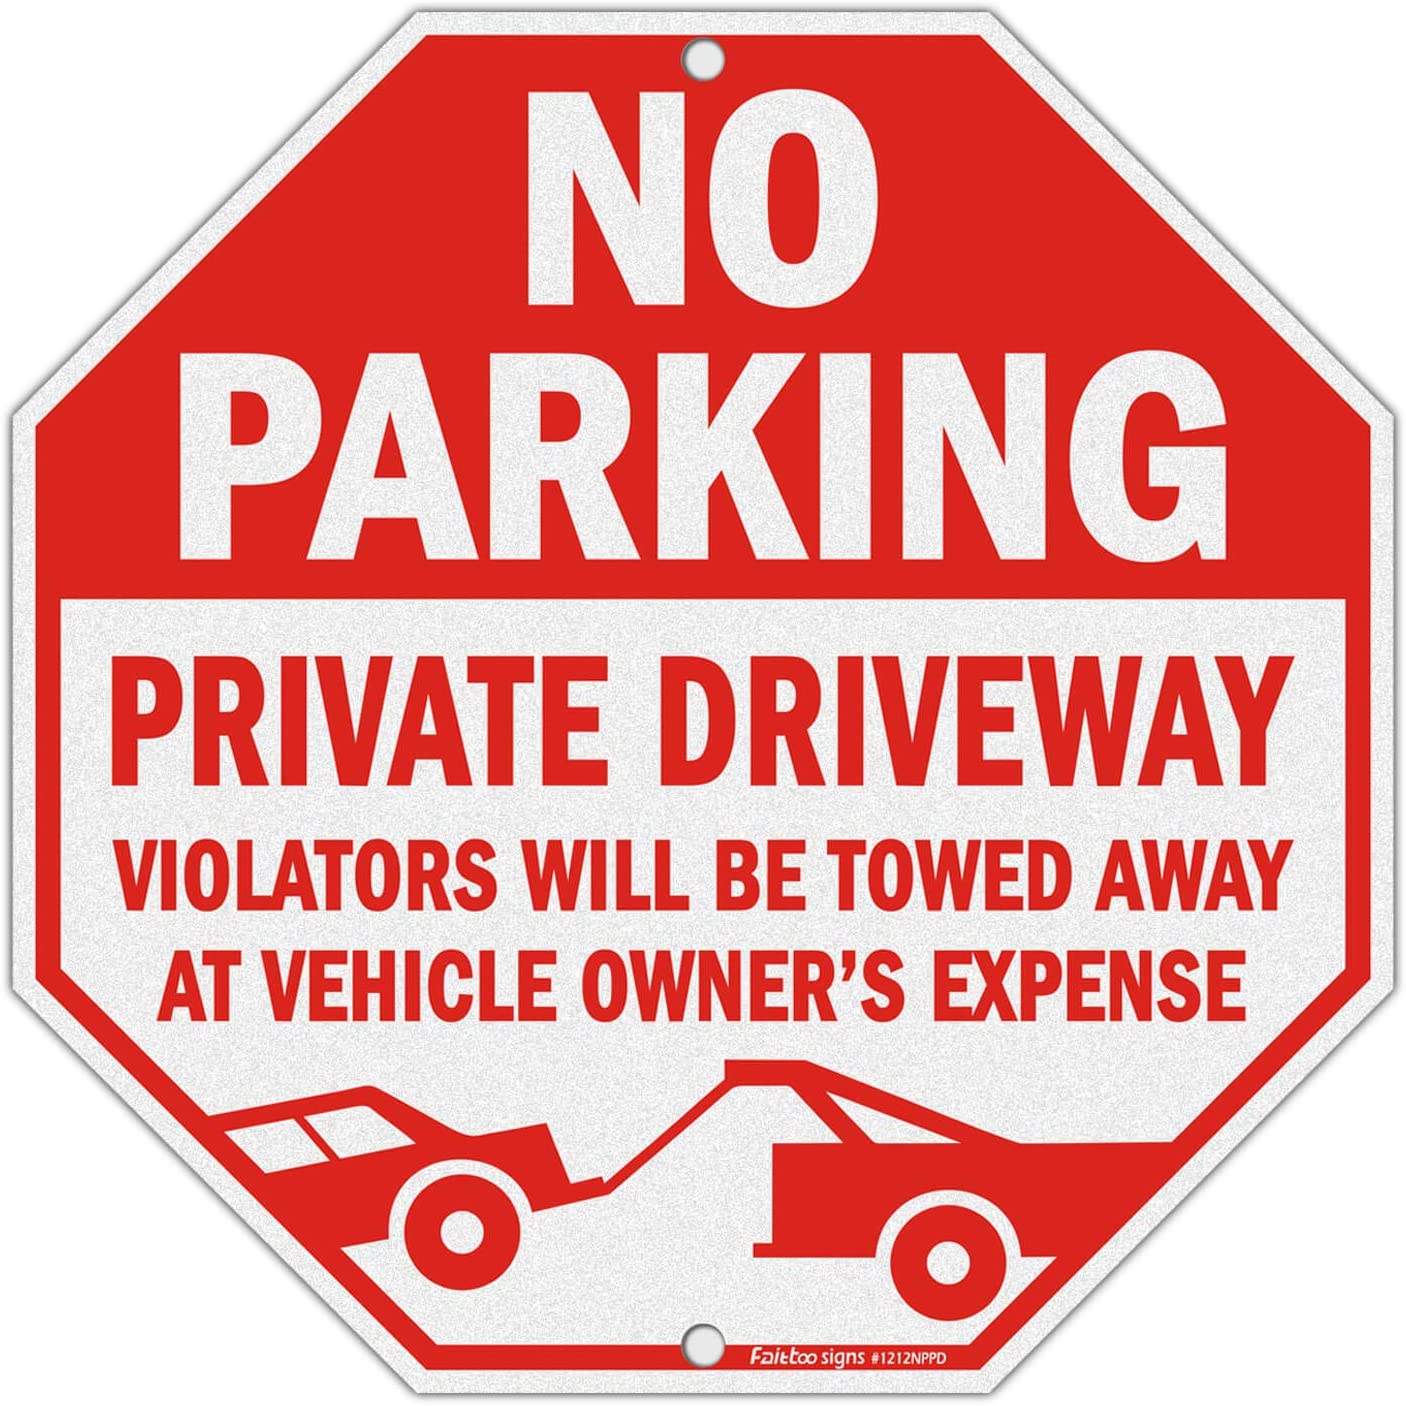 No Parking Sign, Private Driveway Sign Violators Will Be Towed Away at Vehicle Owner&#39;s Expense Sign, 12 x 12 Reflective Rust Free Aluminum, Weather Resistant, Durable Ink, Easy to Mount